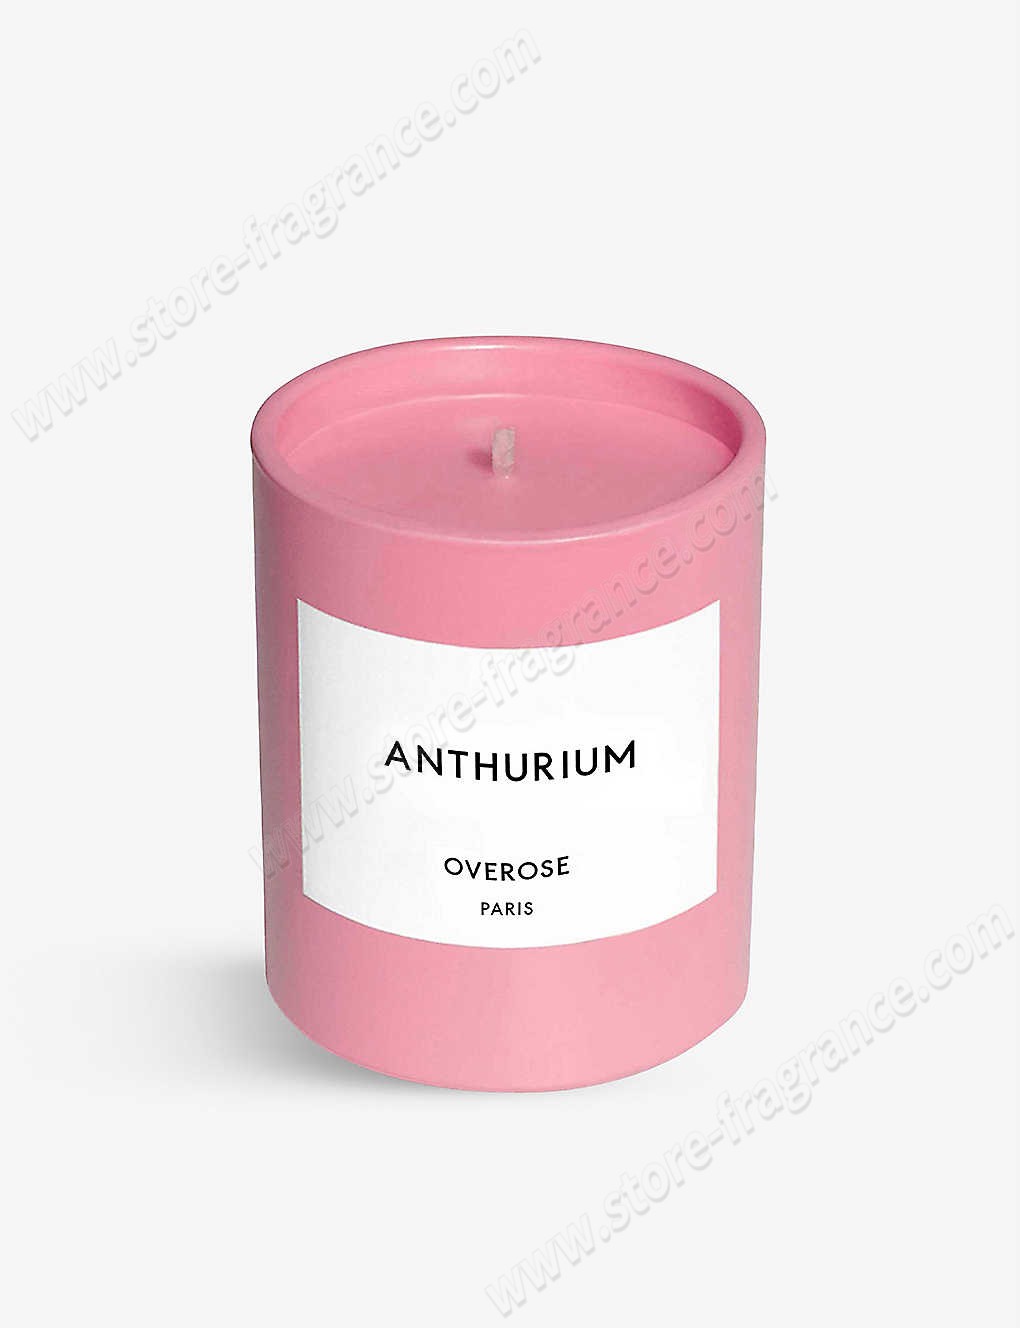 OVEROSE/Anthurium scented candle 200g ✿ Discount Store - OVEROSE/Anthurium scented candle 200g ✿ Discount Store